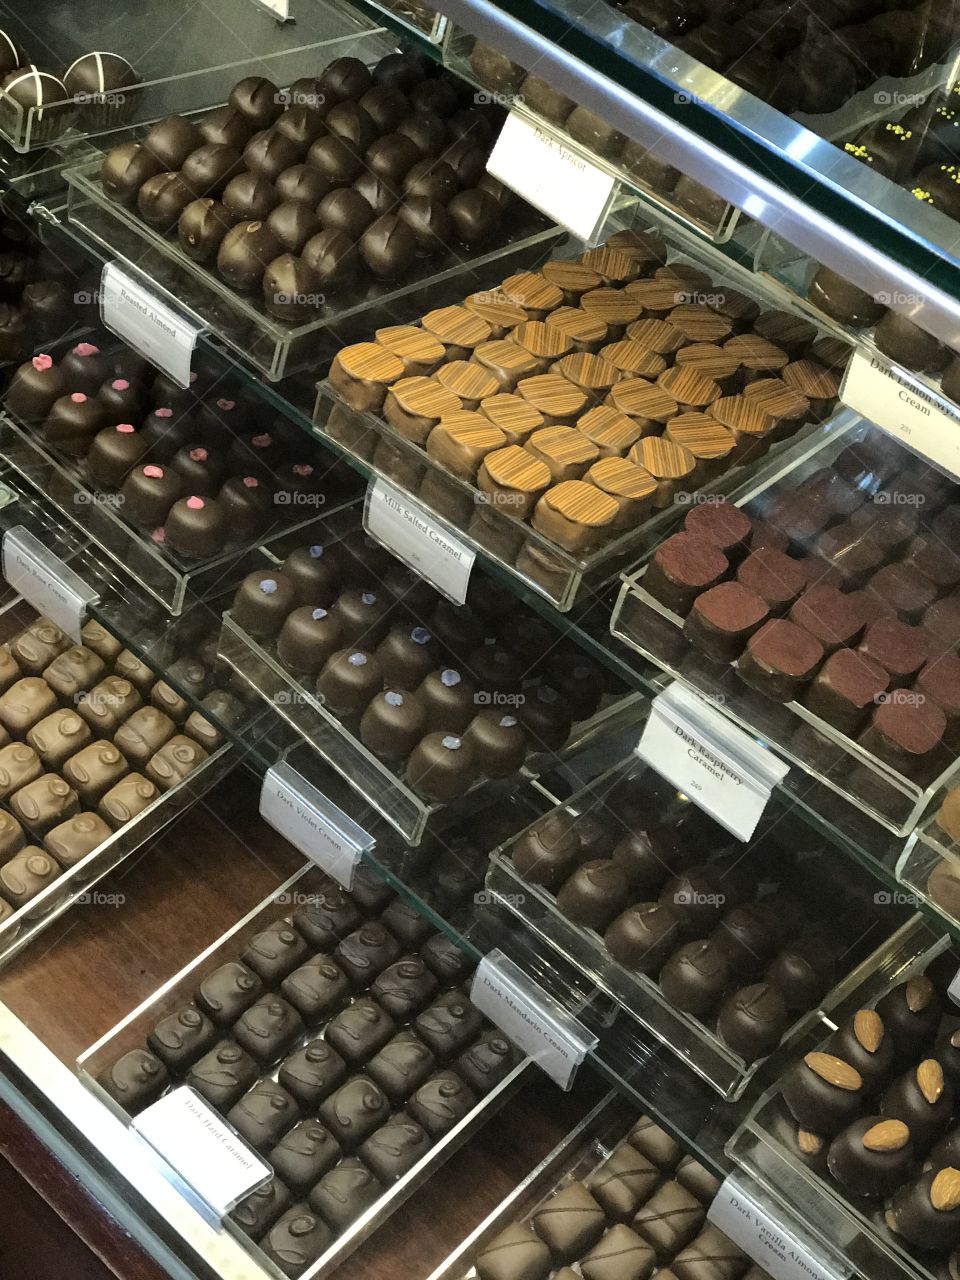 Lots of chocolates. The choice is endless. Melbourne 